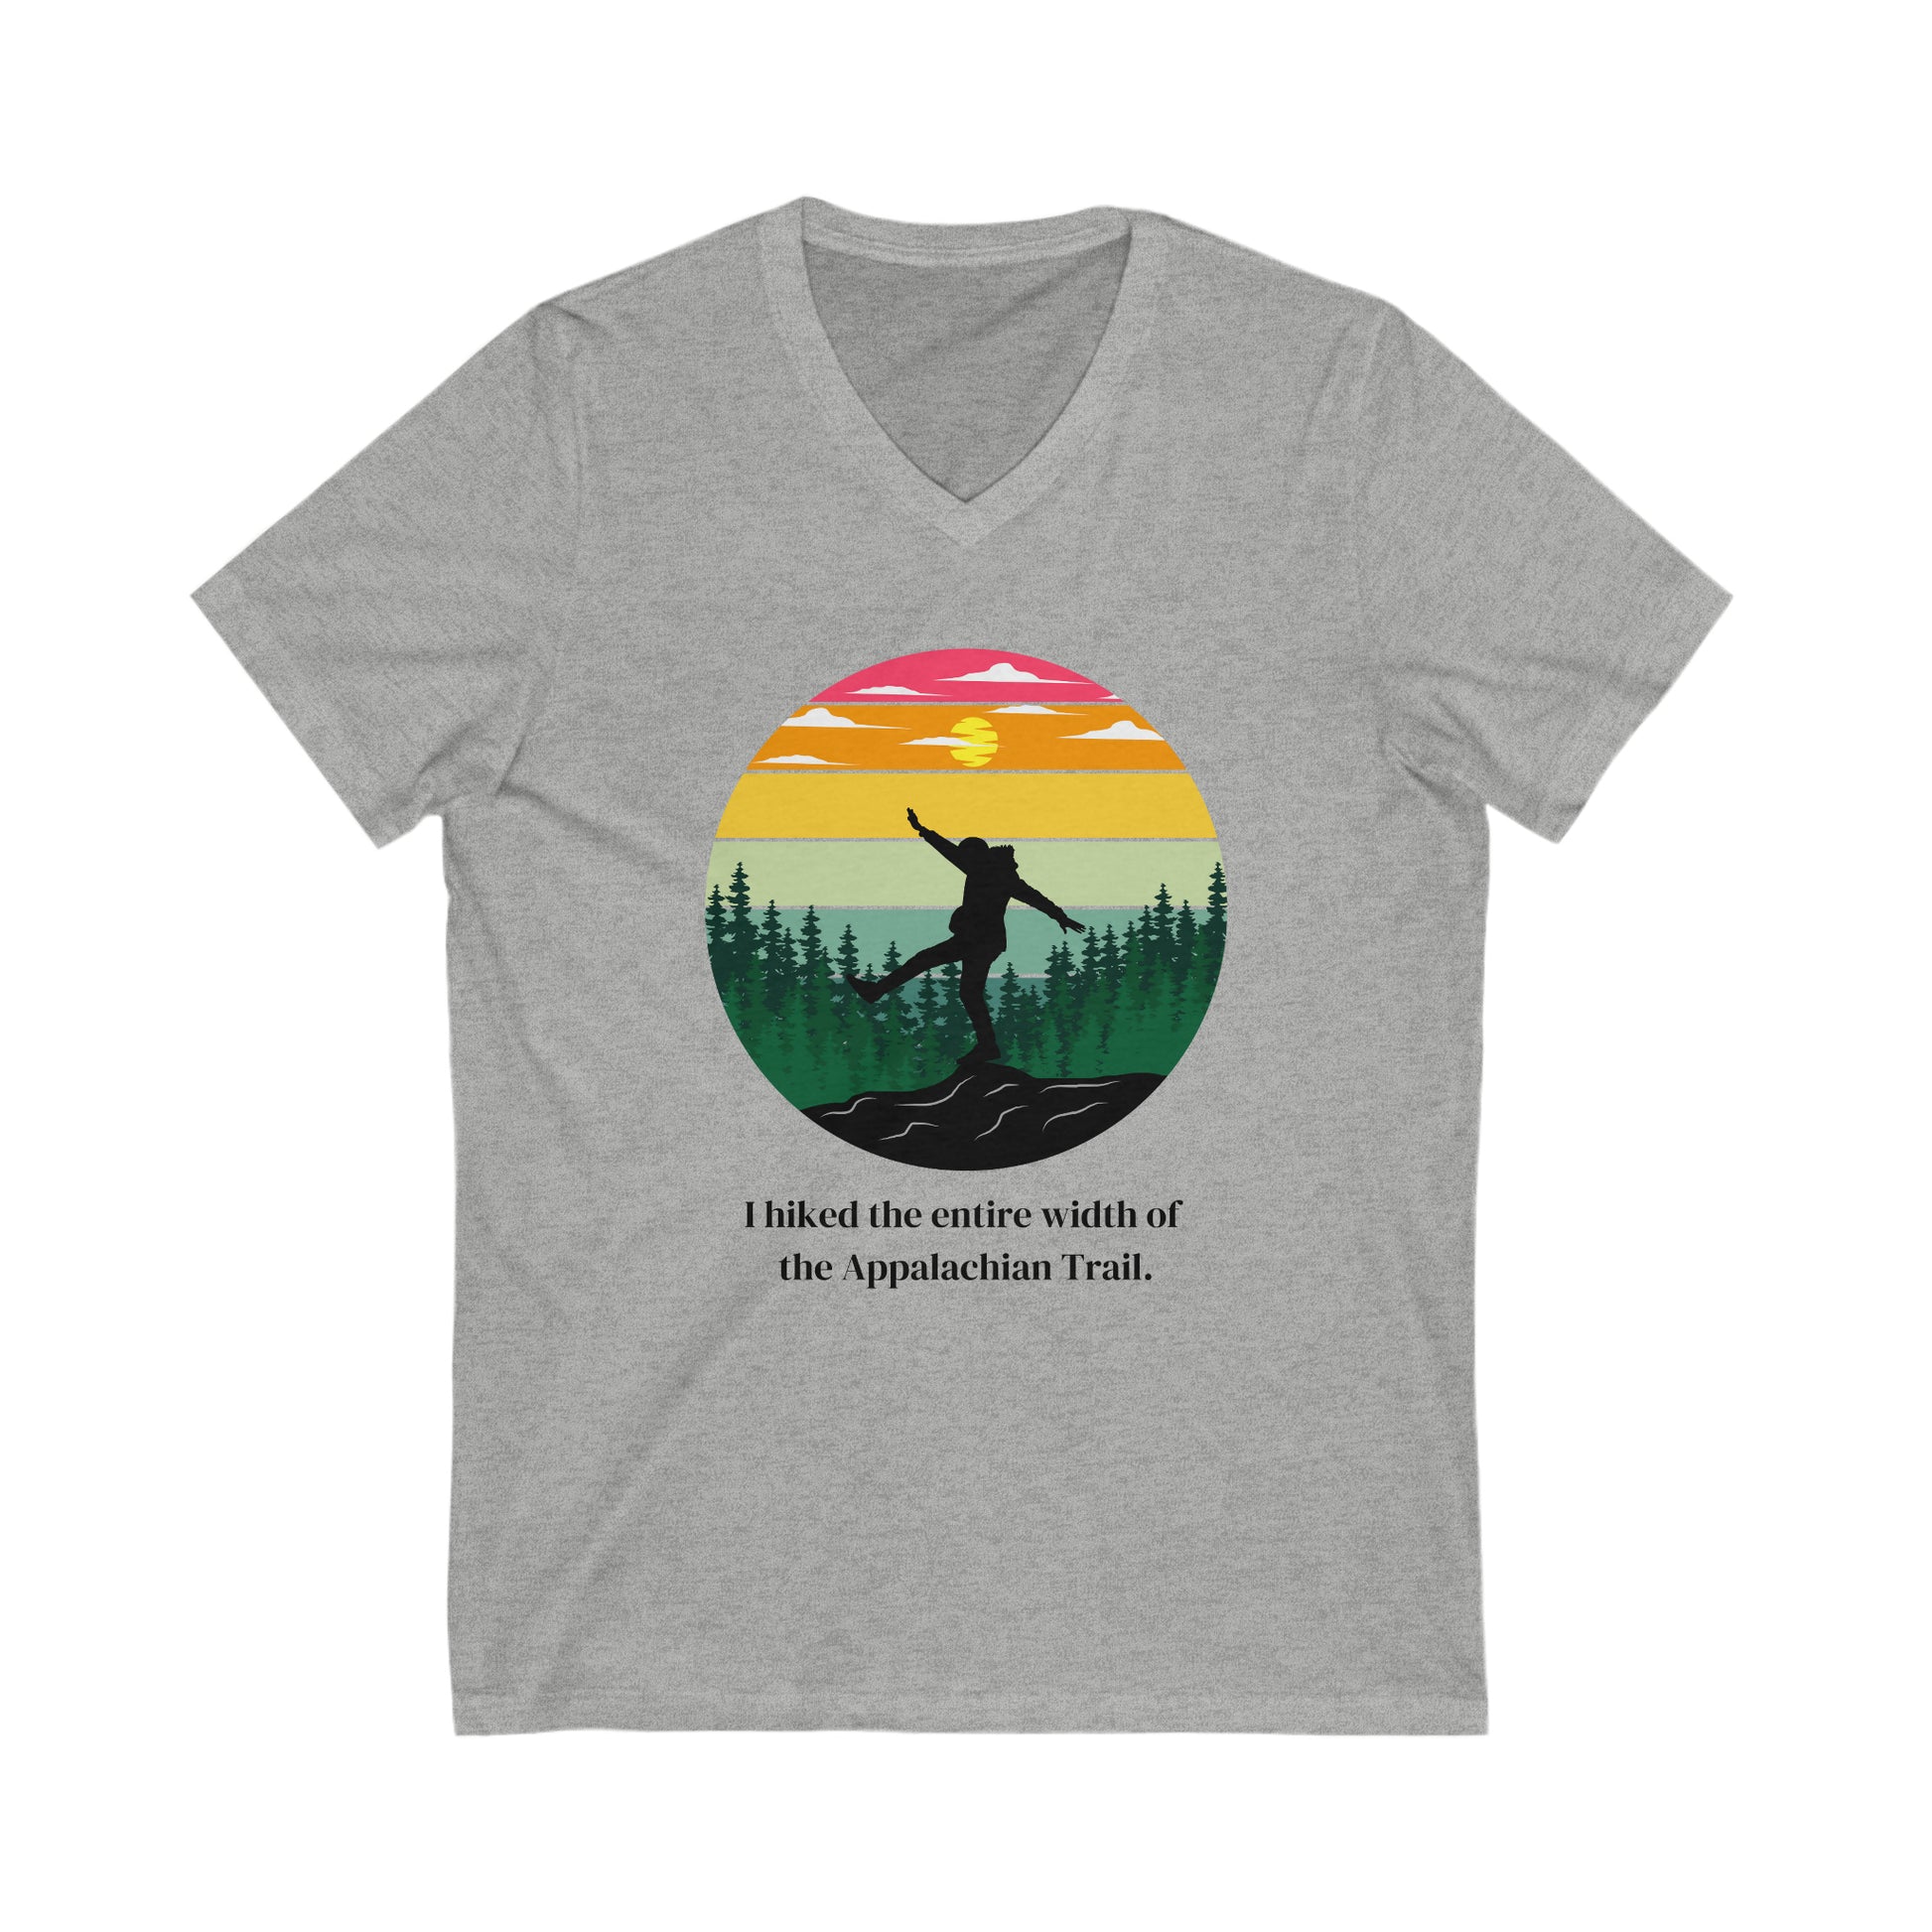 I hiked the Appalachian Trail shirt, Funny Appalachian Trail shirt, I hiked the width of the Appalachian Trail shirt, Funny shirts for hikers, shirts for hikers